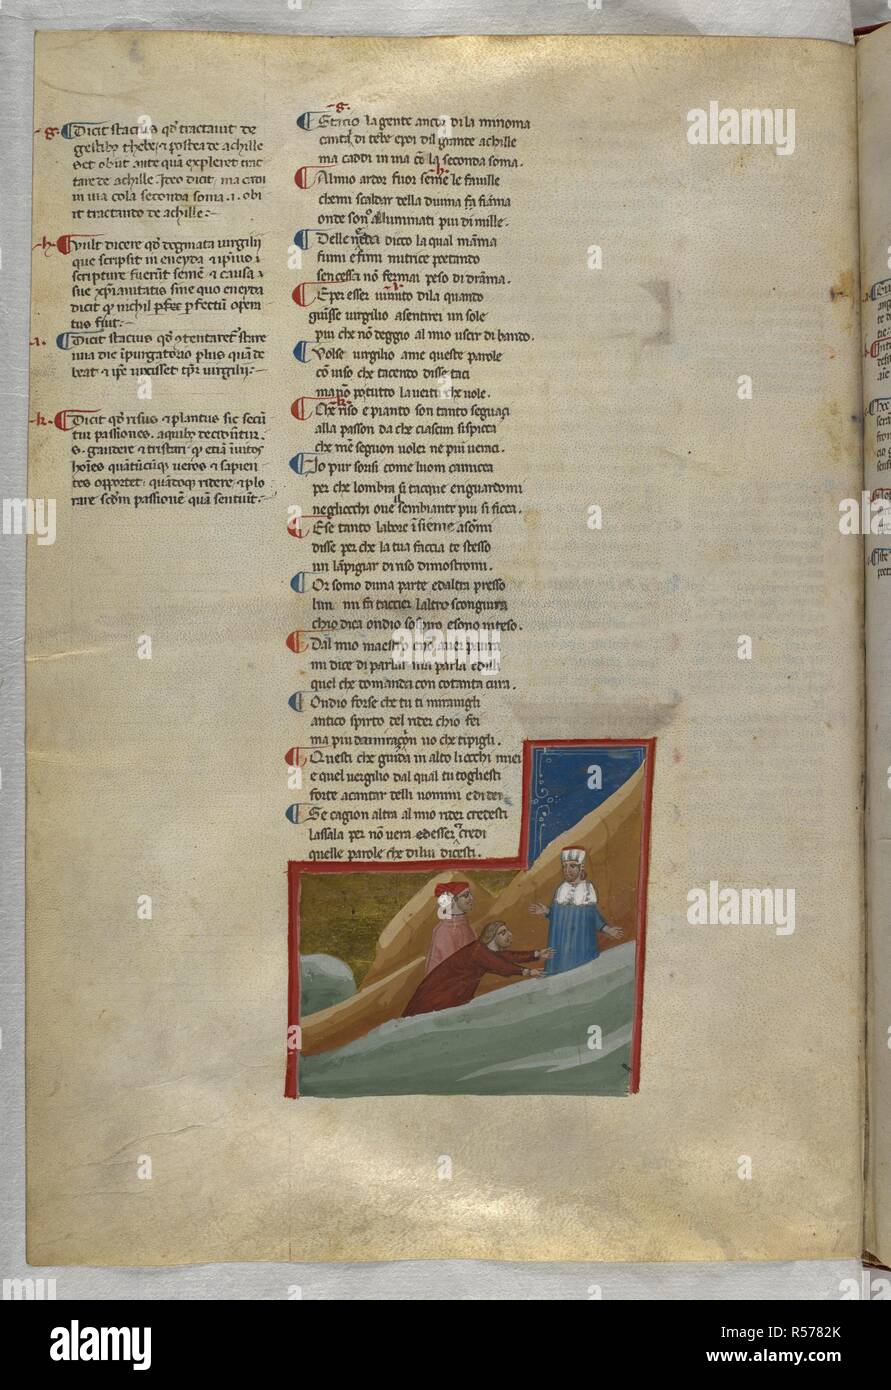 Purgatorio: Statius tries to embrace Virgil. Dante Alighieri, Divina Commedia ( The Divine Comedy ), with a commentary in Latin. 1st half of the 14th century. Source: Egerton 943, f.101v. Language: Italian, Latin. Stock Photo